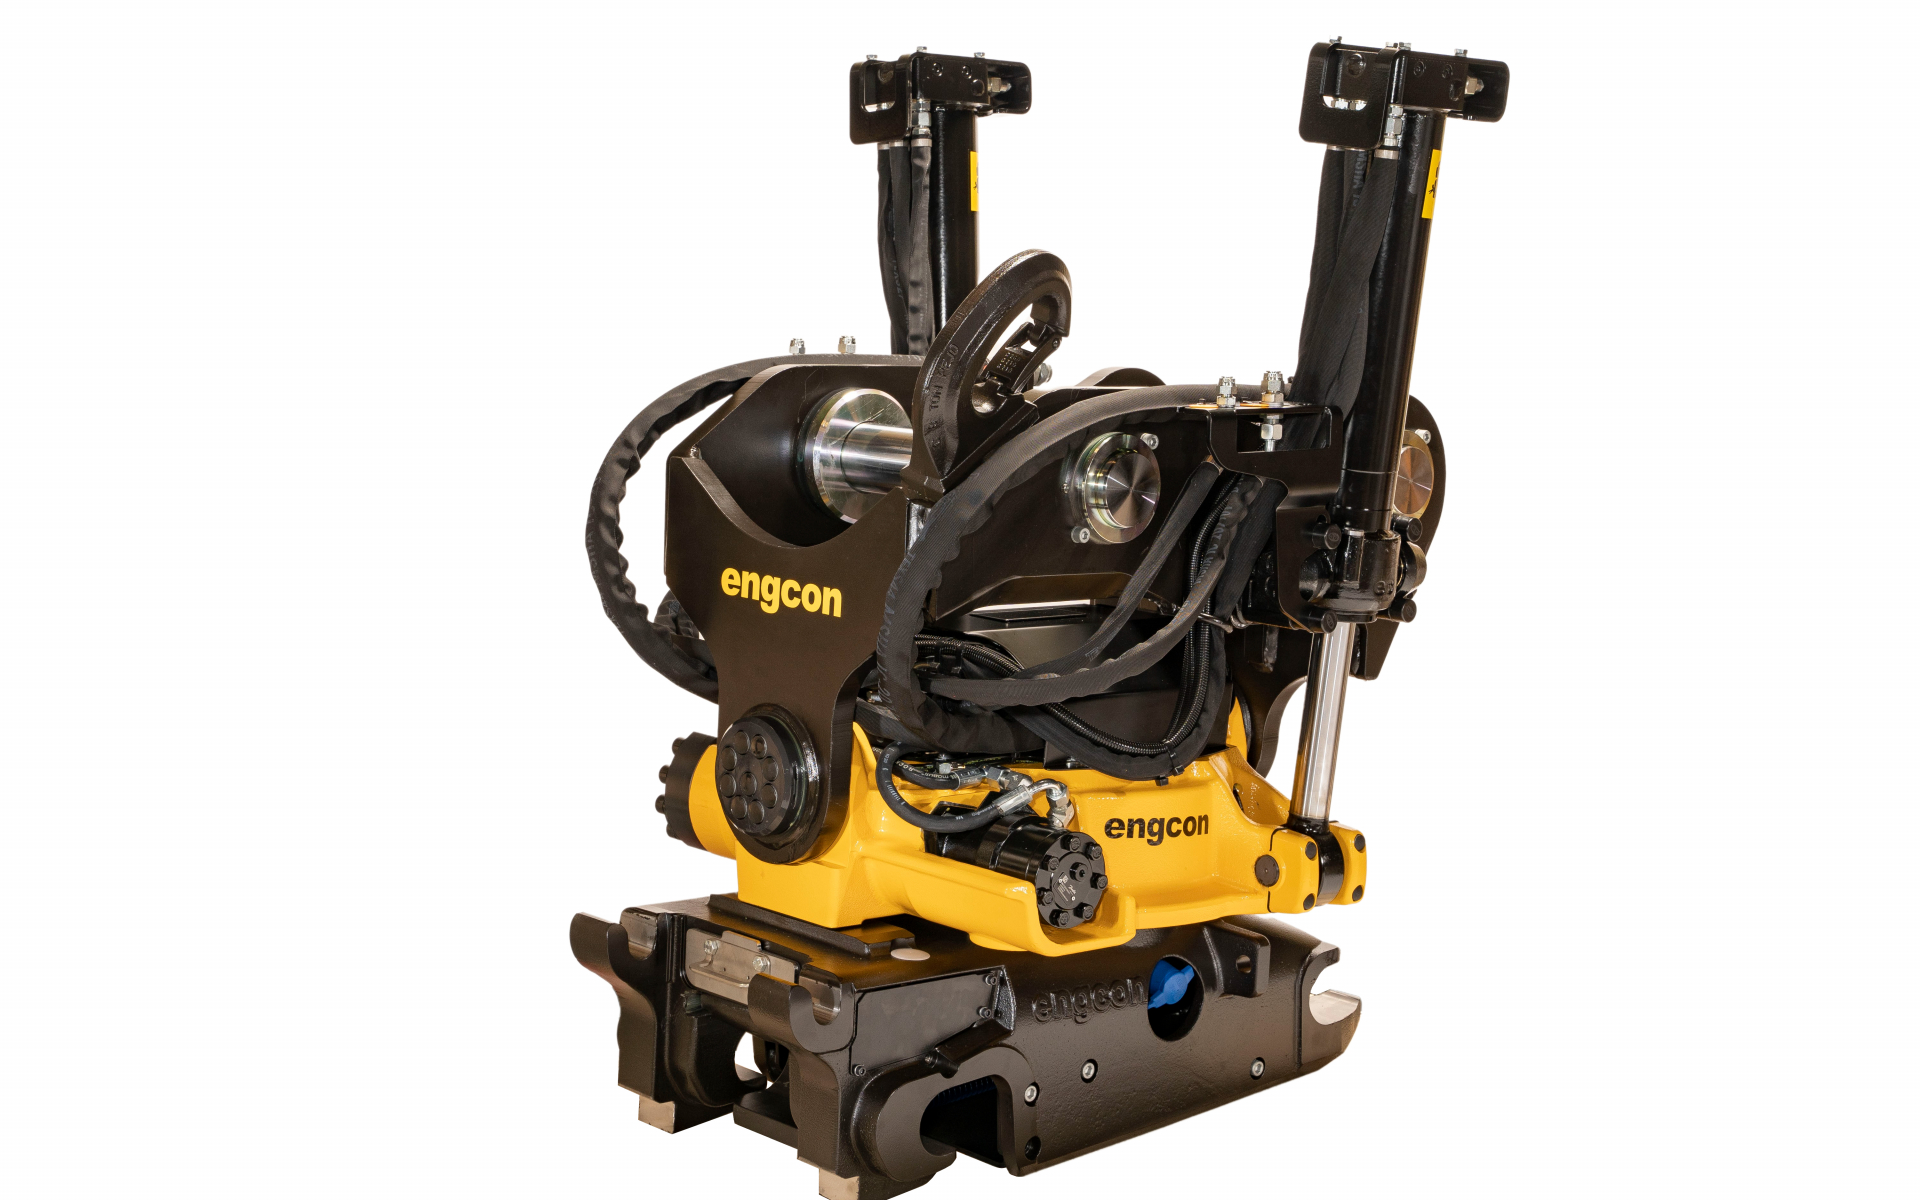 Engcon’s EC226 tiltrotator for larger excavators gets an upgraded lifting hook – now approved for 8 ton lifting